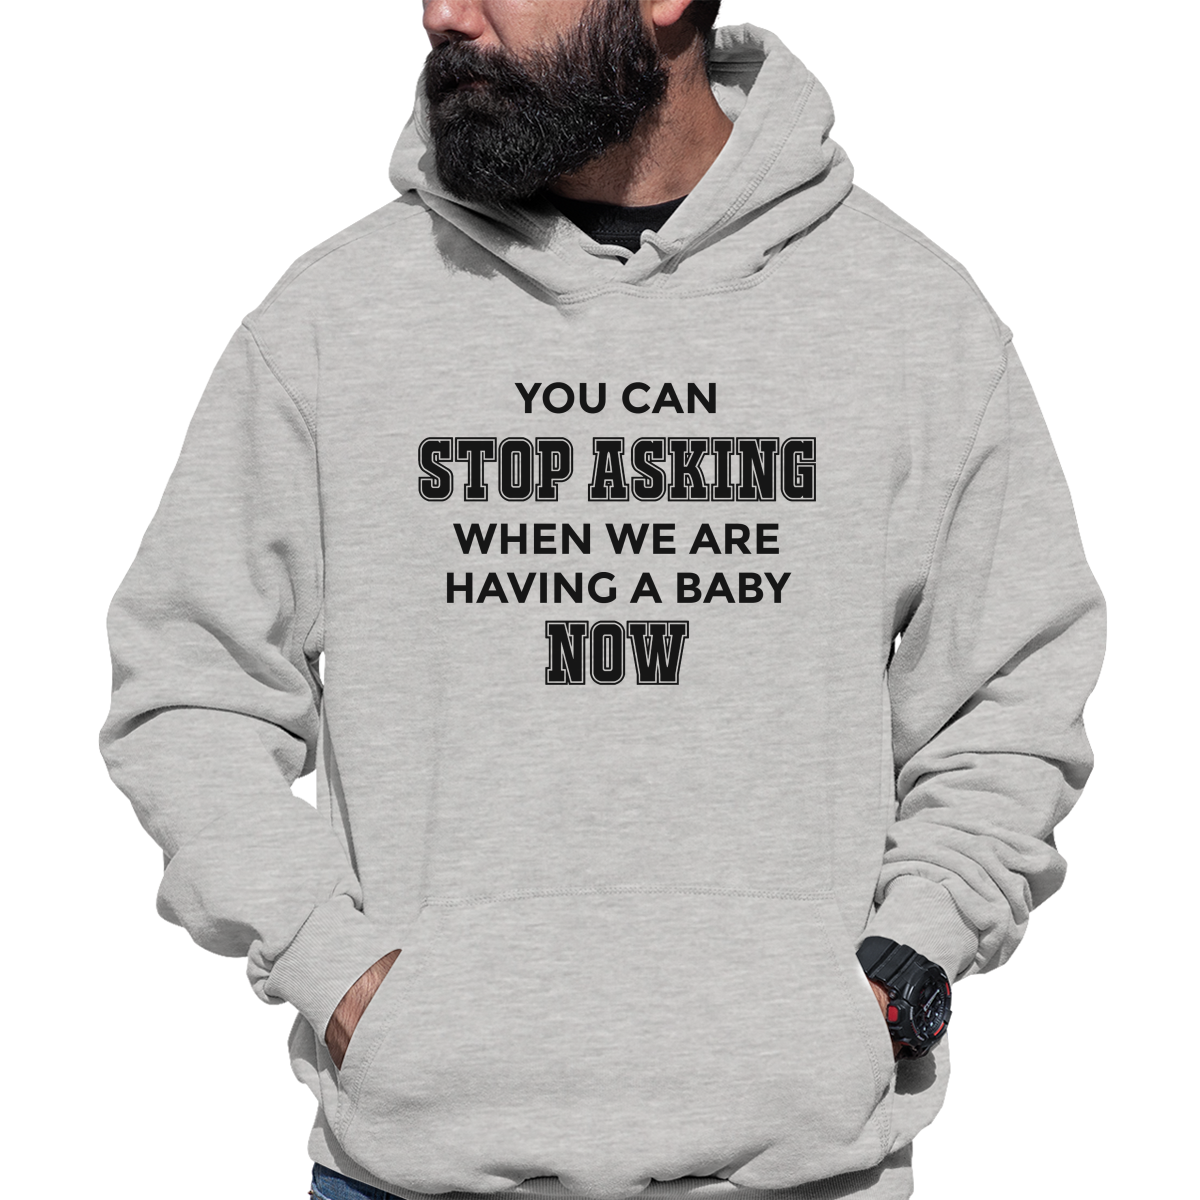 You can stop asking when we are having baby NOW Unisex Hoodie | Gray